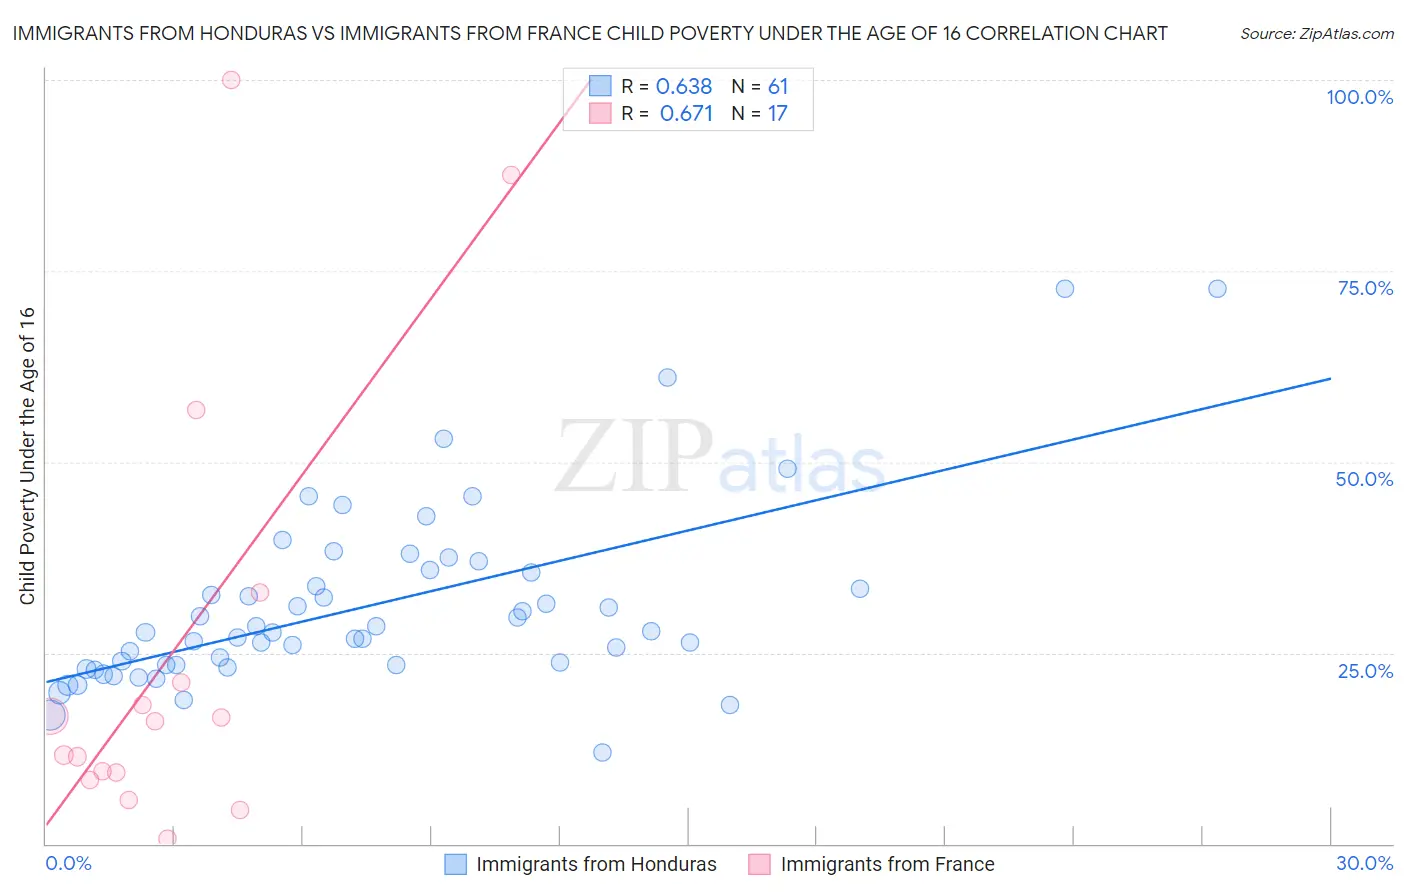 Immigrants from Honduras vs Immigrants from France Child Poverty Under the Age of 16